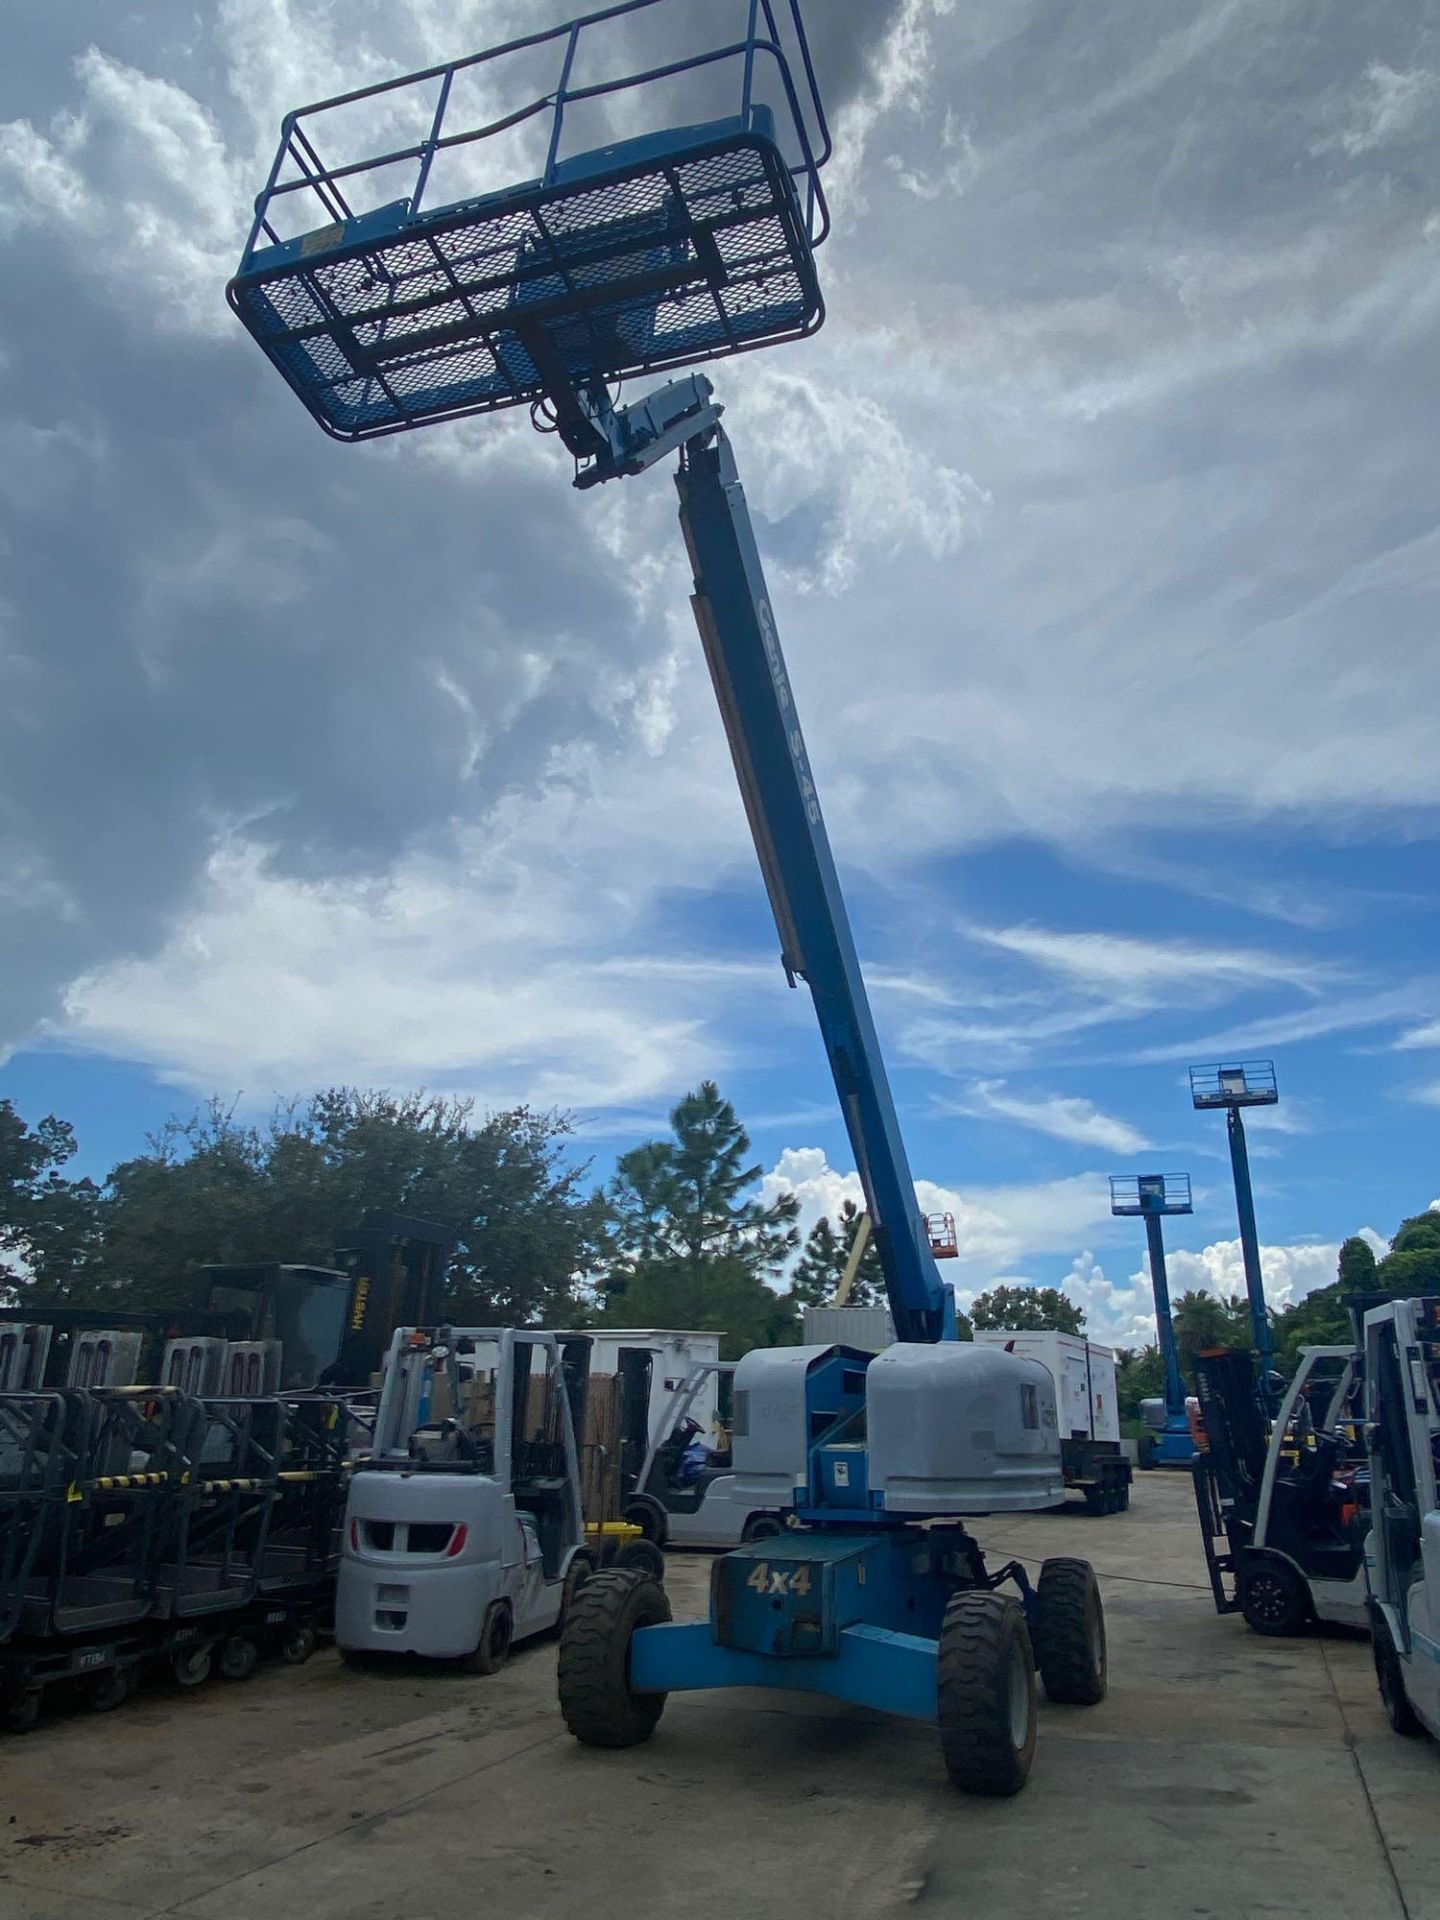 GENIE S-45 ARTICULATING DIESEL BOOM LIFT, 4x4, 45' PLATFORM HEIGHT, RUNS AND OPERATES - Image 12 of 12